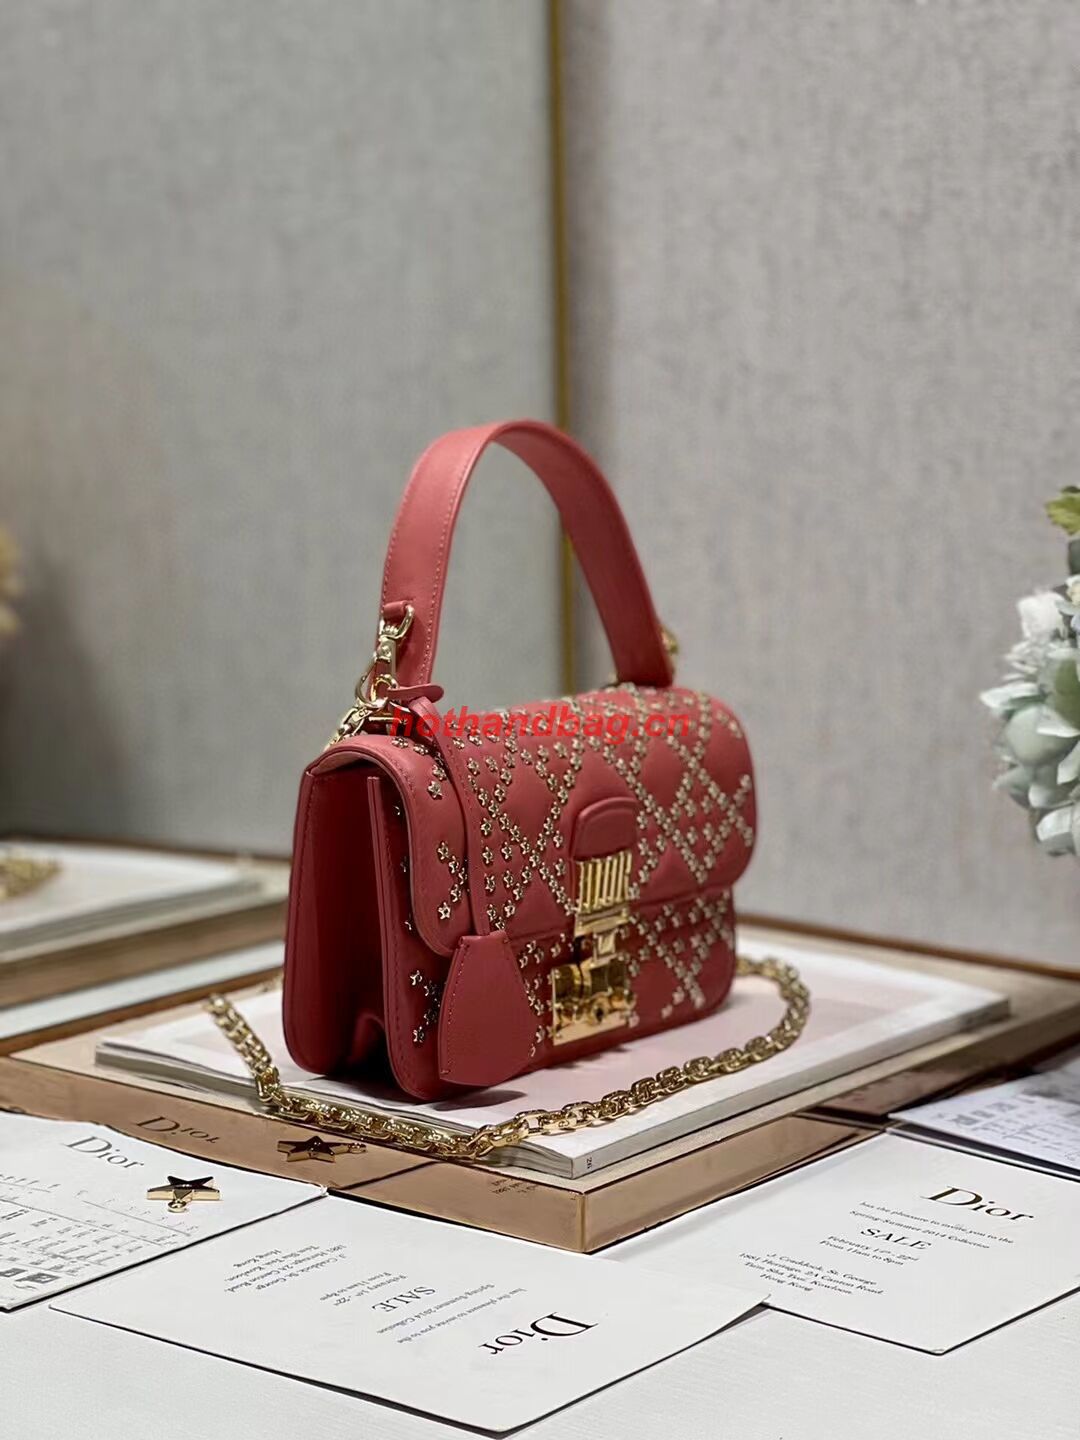 DIOR BAG Lucky Star Cannage Lambskin C2628 red